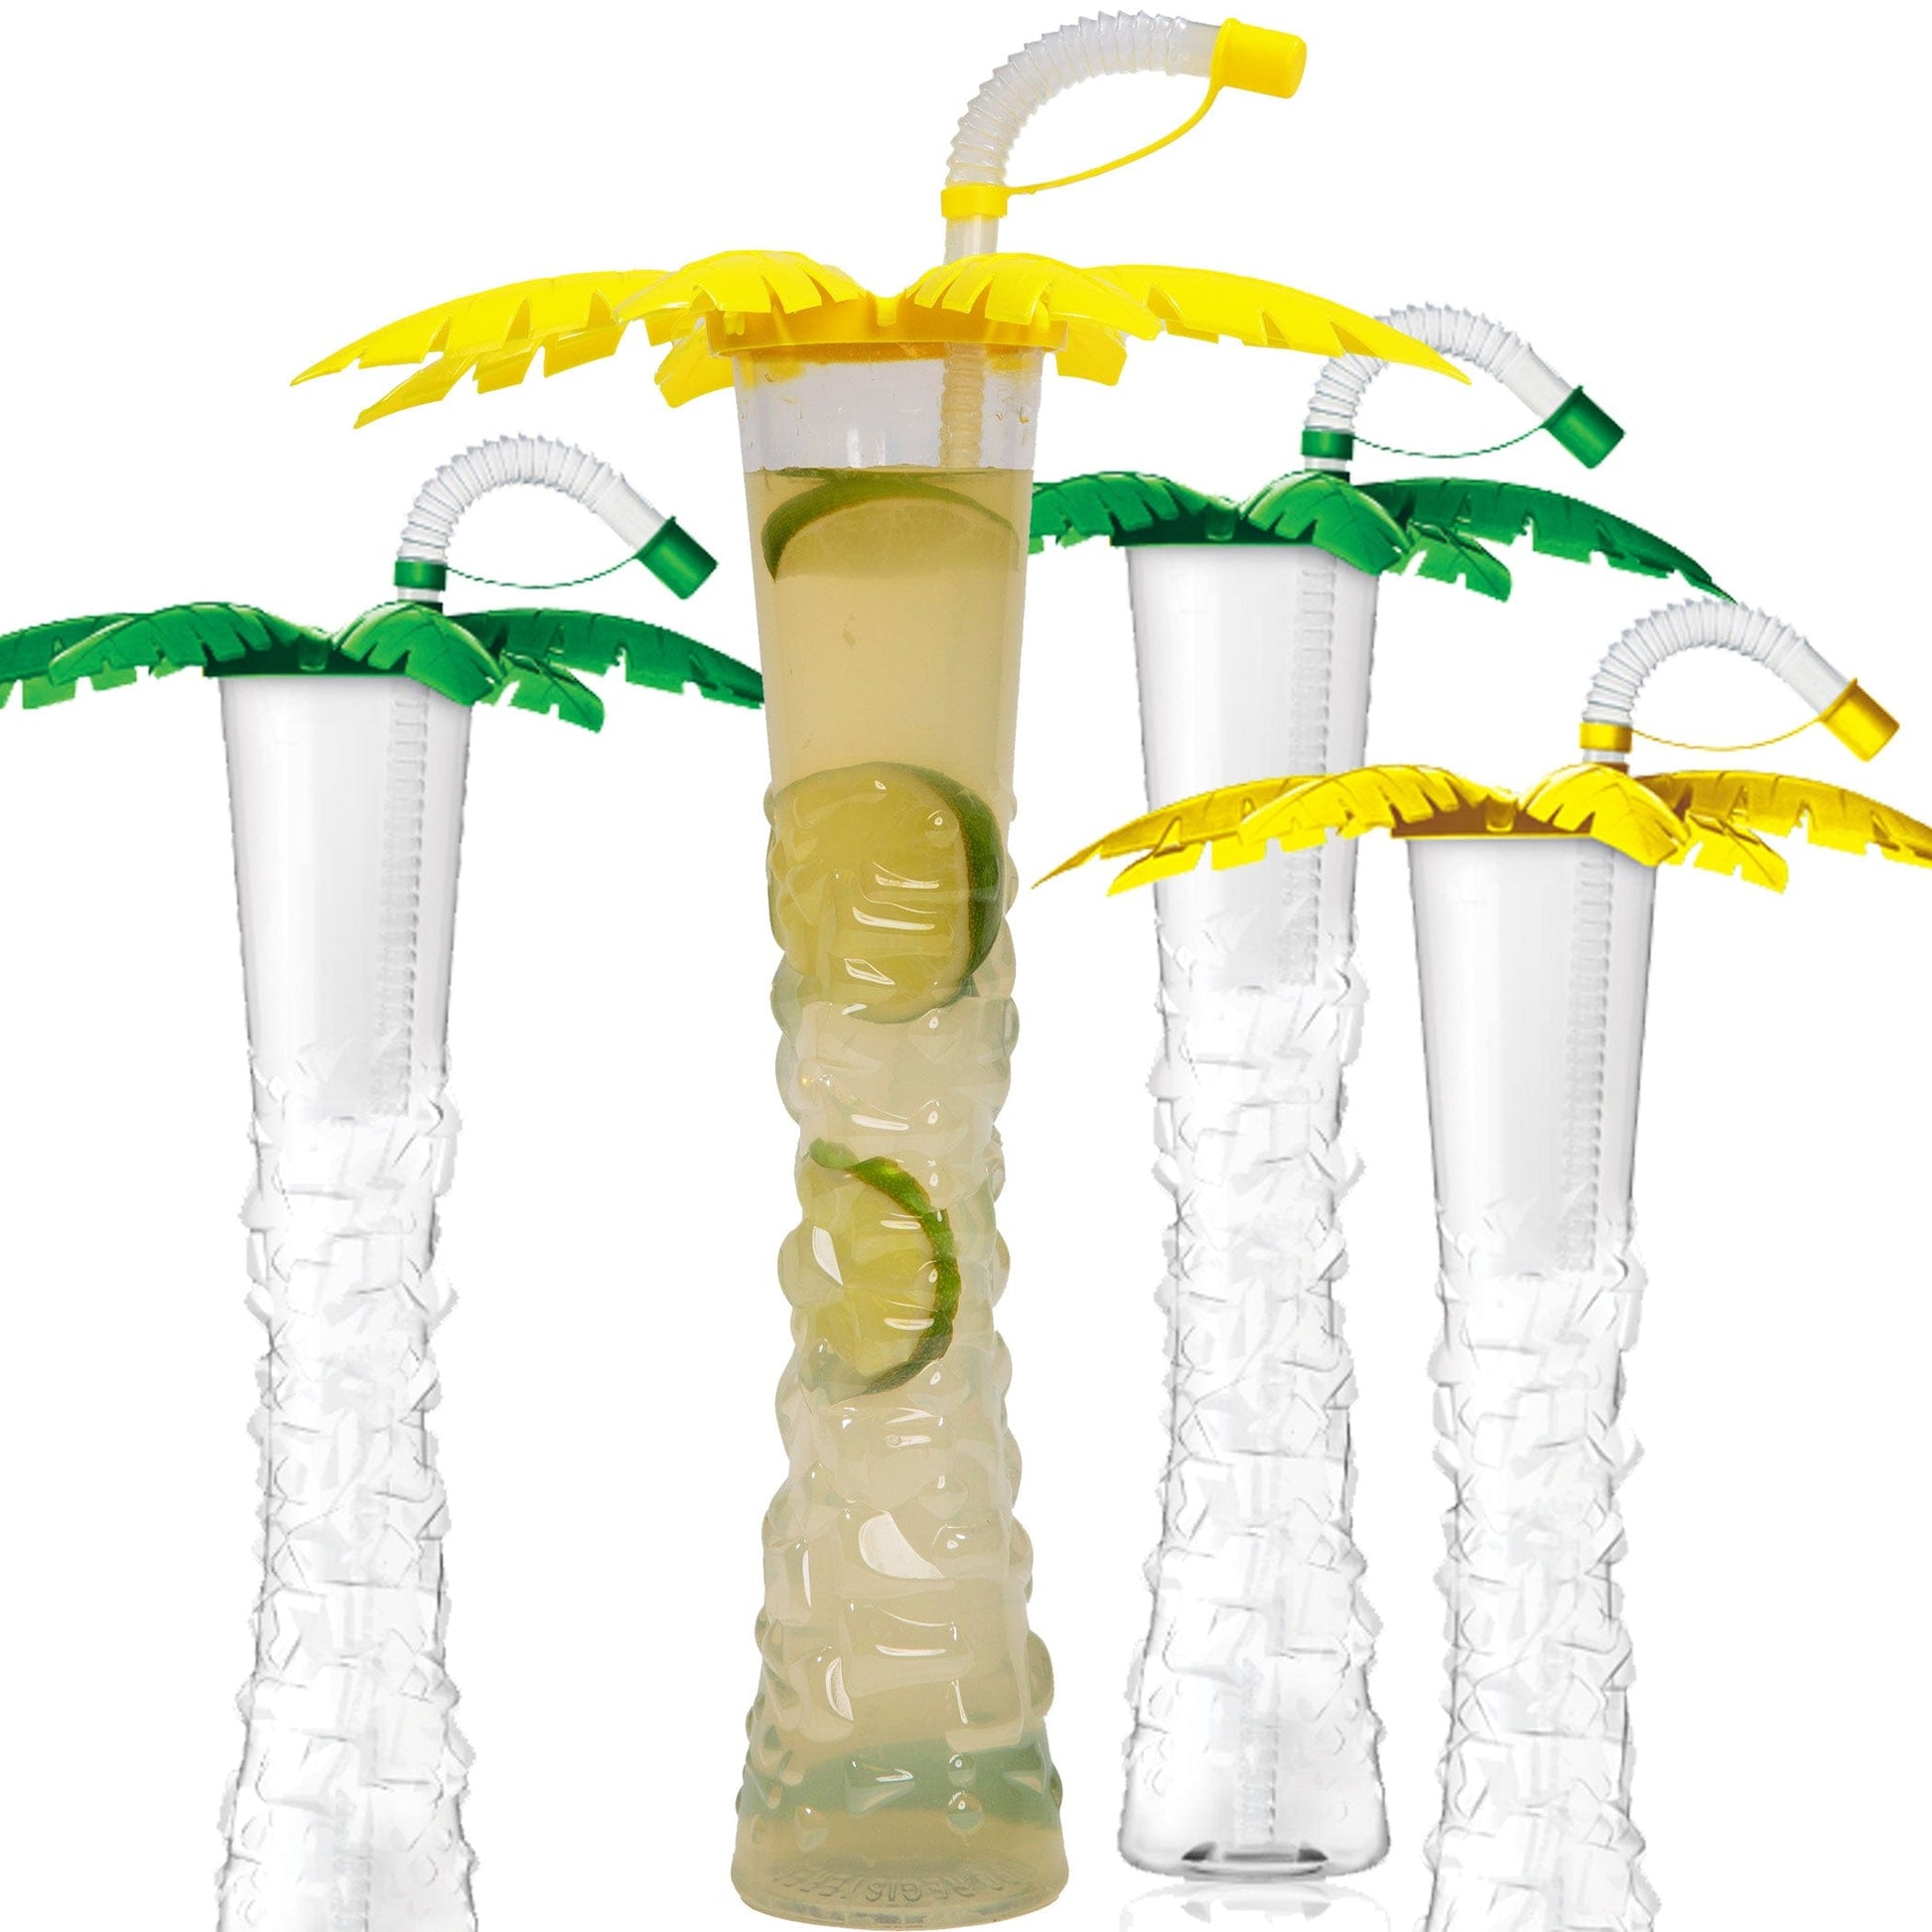 Sweet World USA Yard Cups Palm Tree Yard Cup - 17 oz. (Box of 54 Cups) - clear cup with Green and Yellow Palm Lids and Straws cups with lids and straws